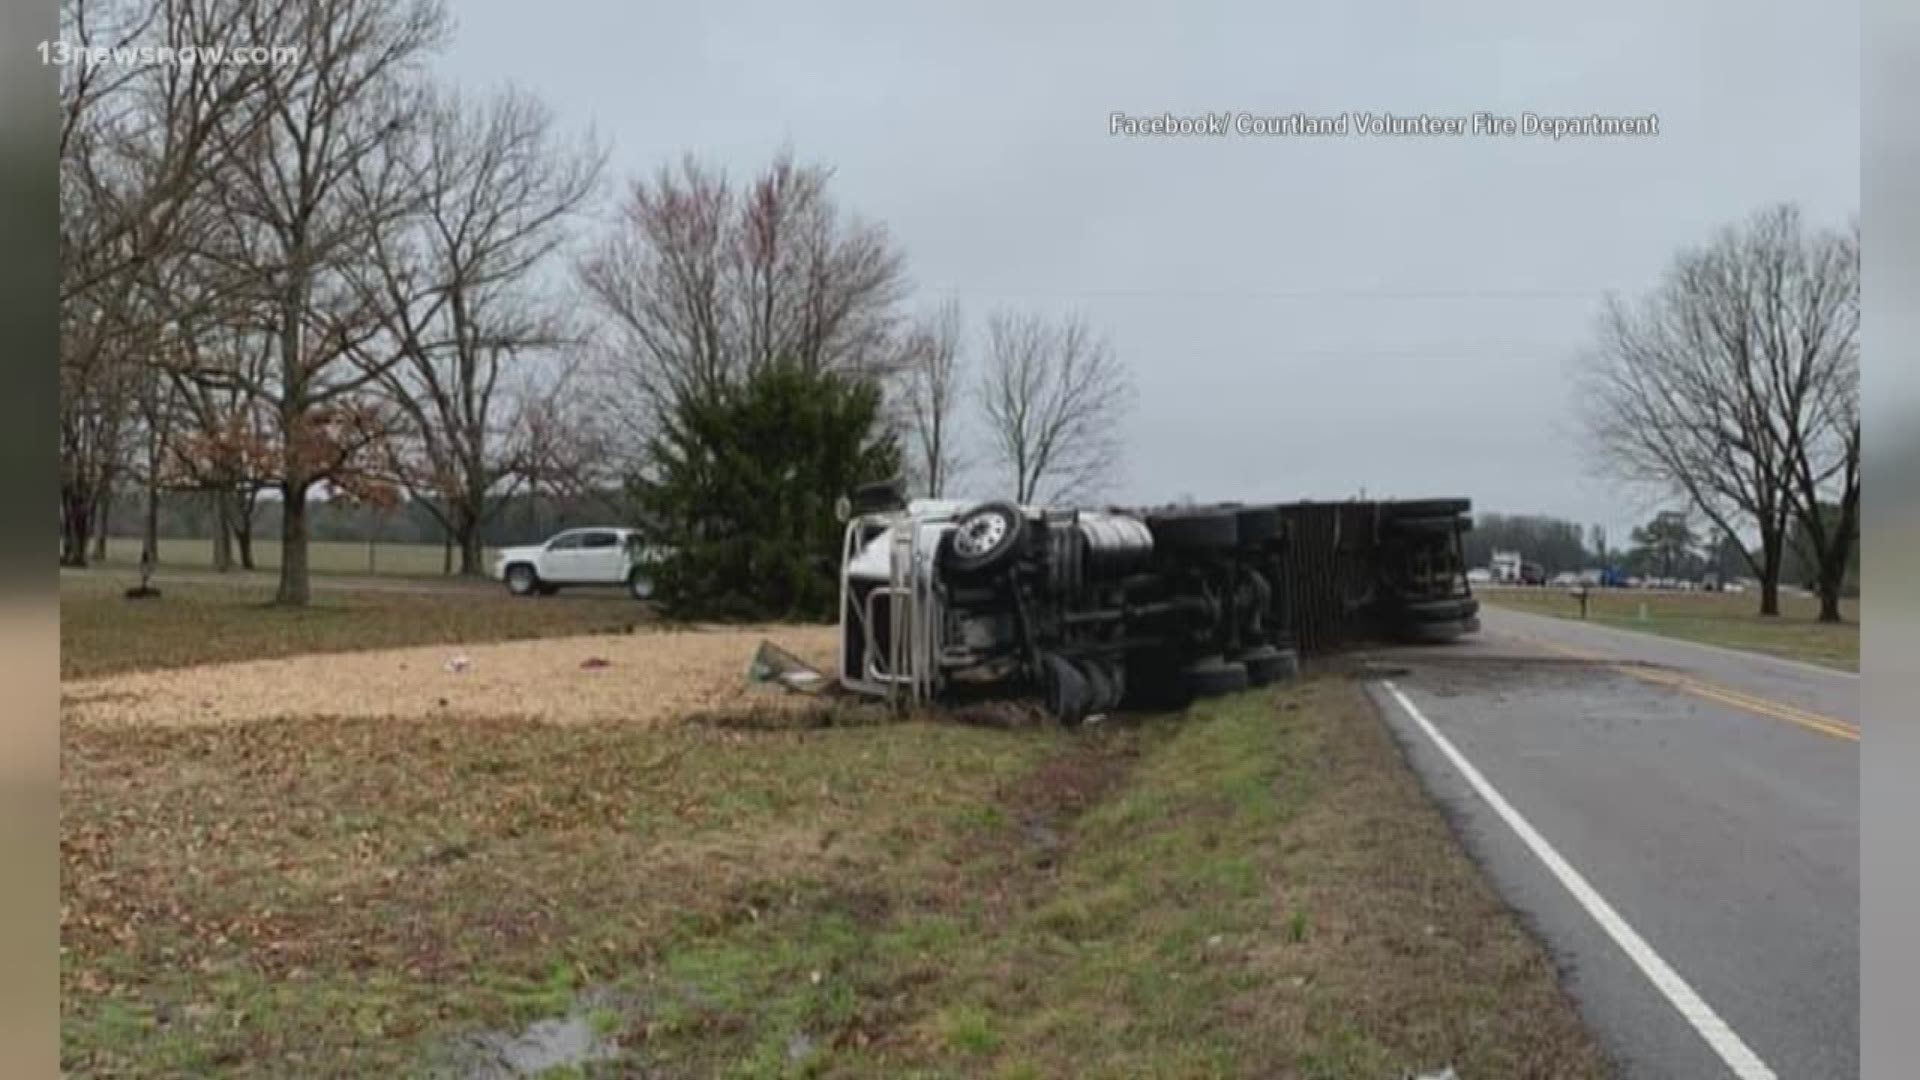 A tractor -trailer carrying peanuts overturned in Courtland. The driver was ejected and had to be medevaced to a hospital.